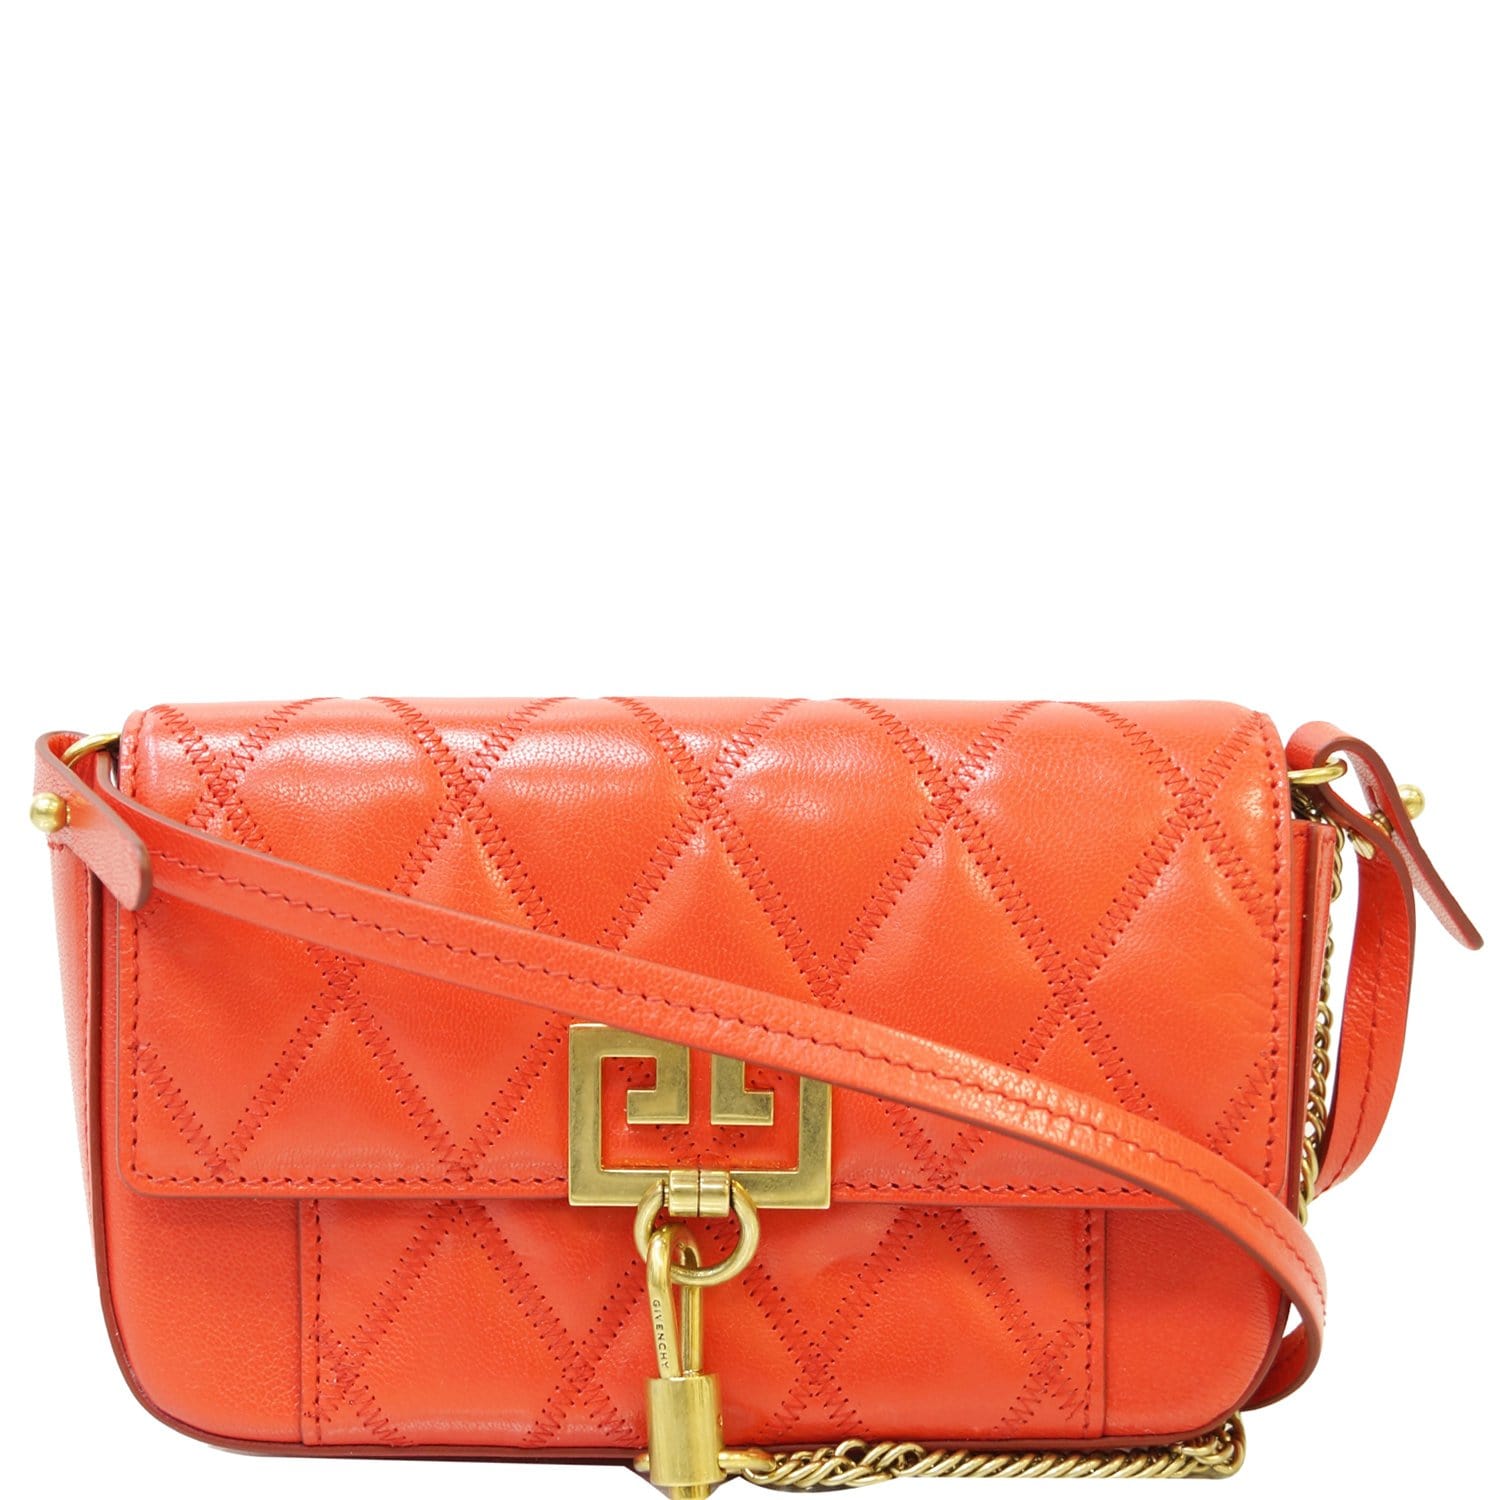 GIVENCHY GV3 Mini Quilted Leather Crossbody Bag Orange - 15% OFF